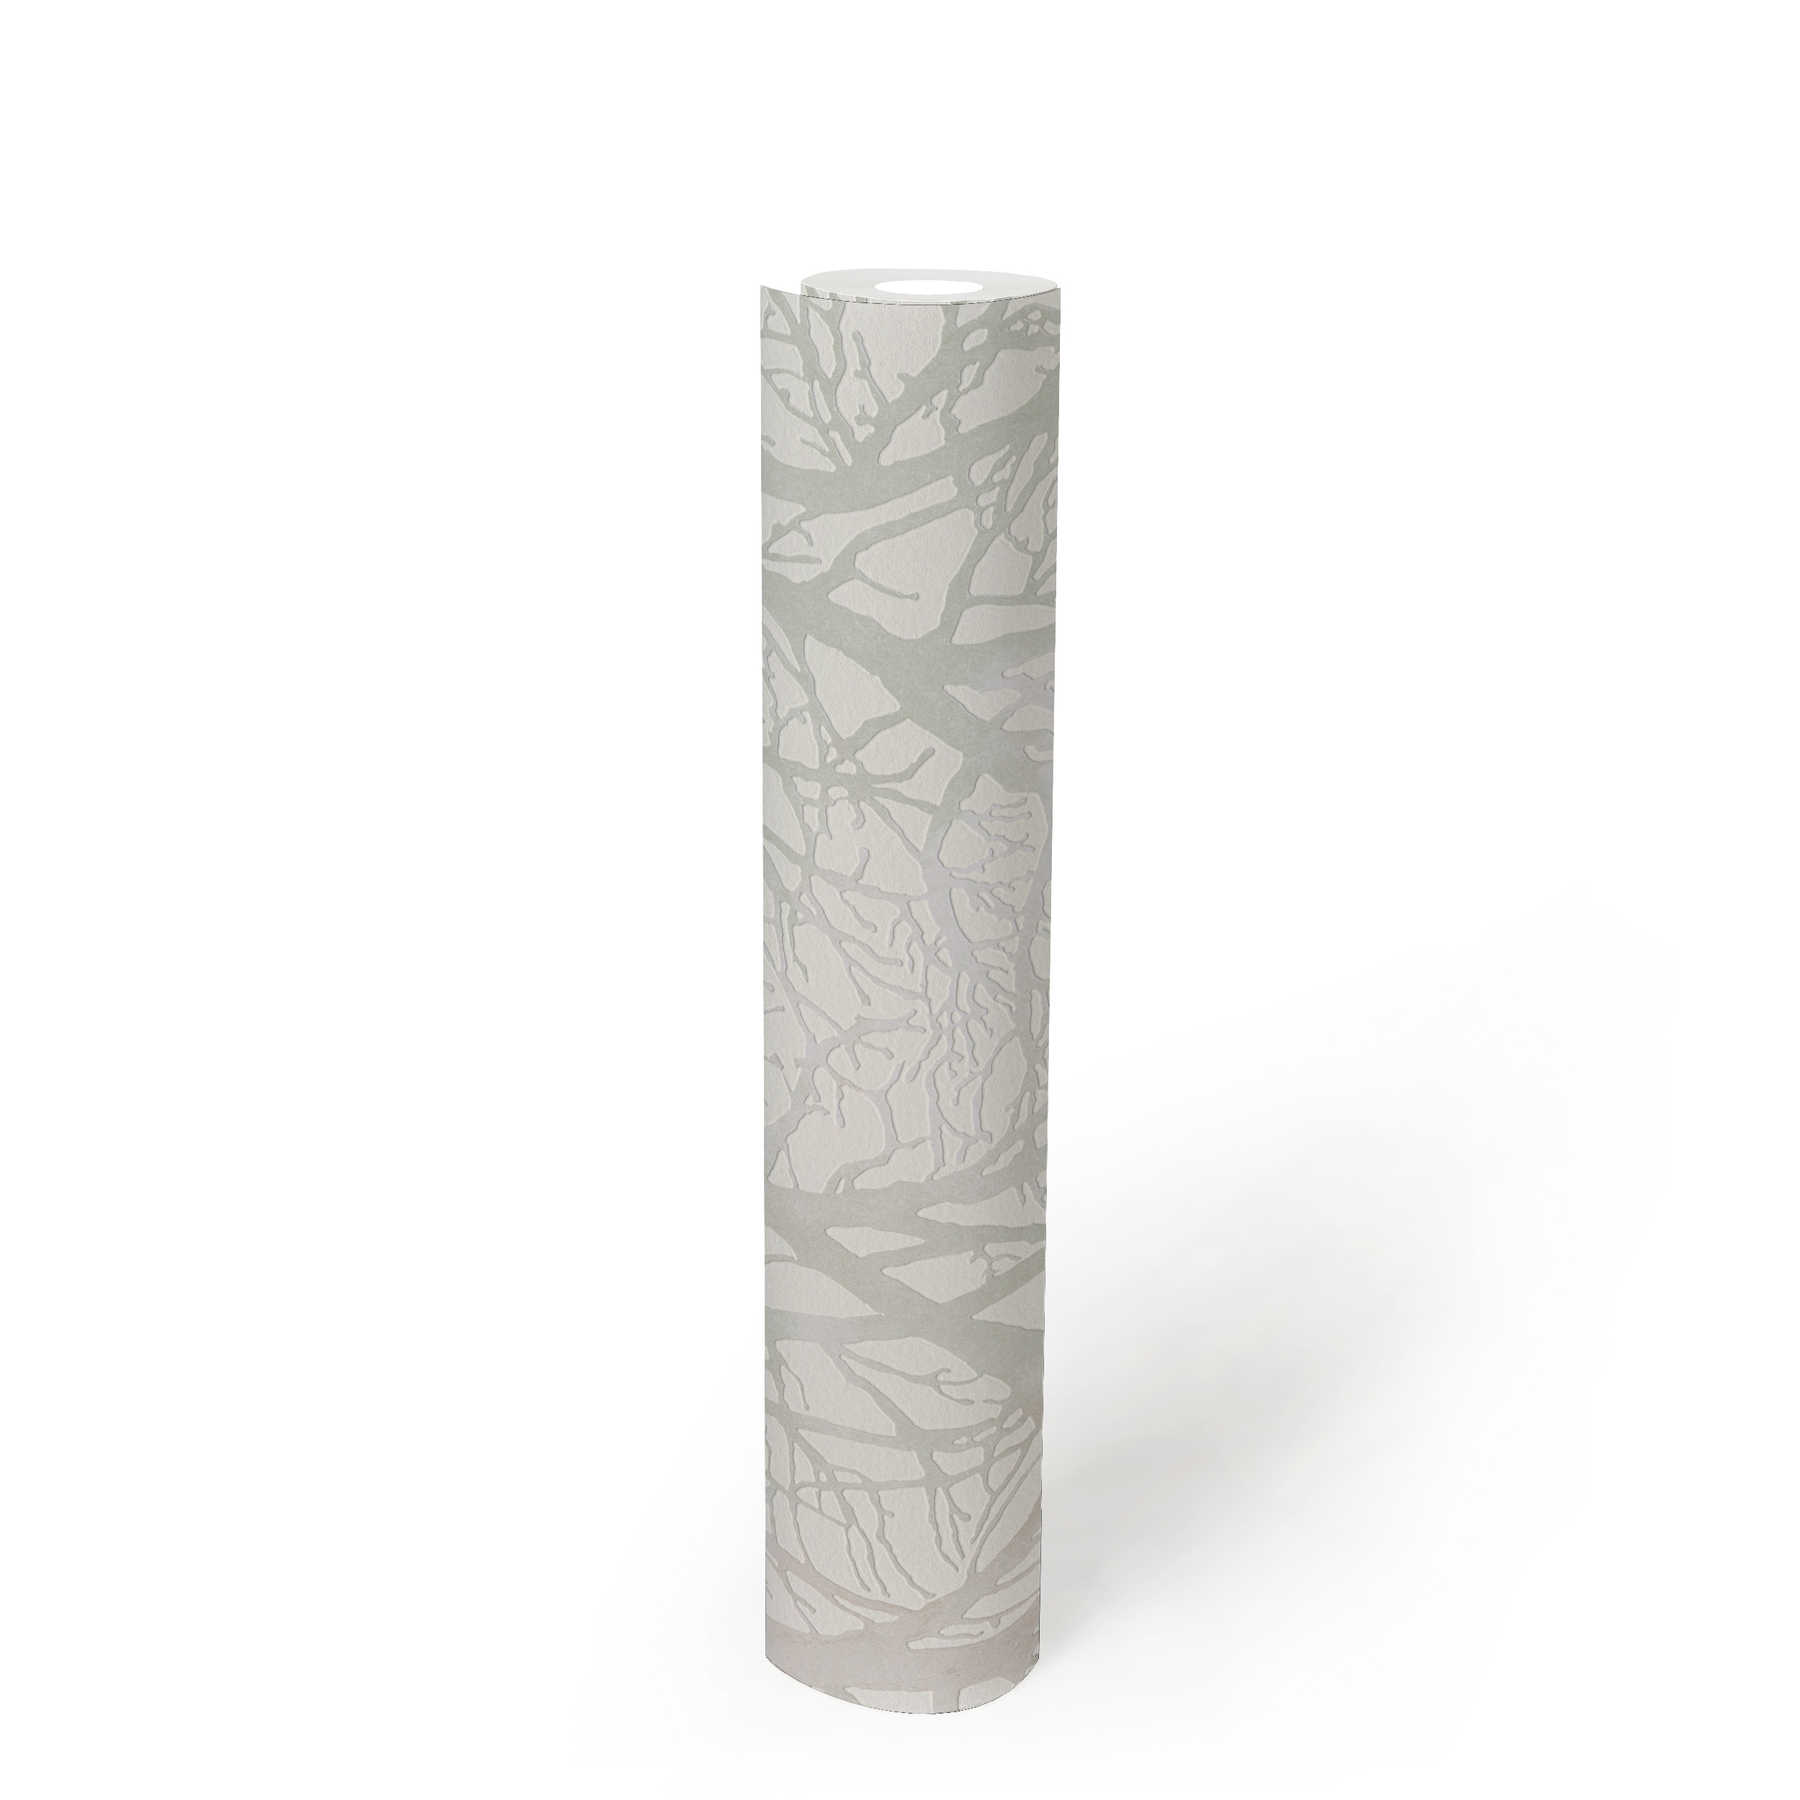             Silver grey wallpaper with tree motif and metallic effect - white, green, silver
        